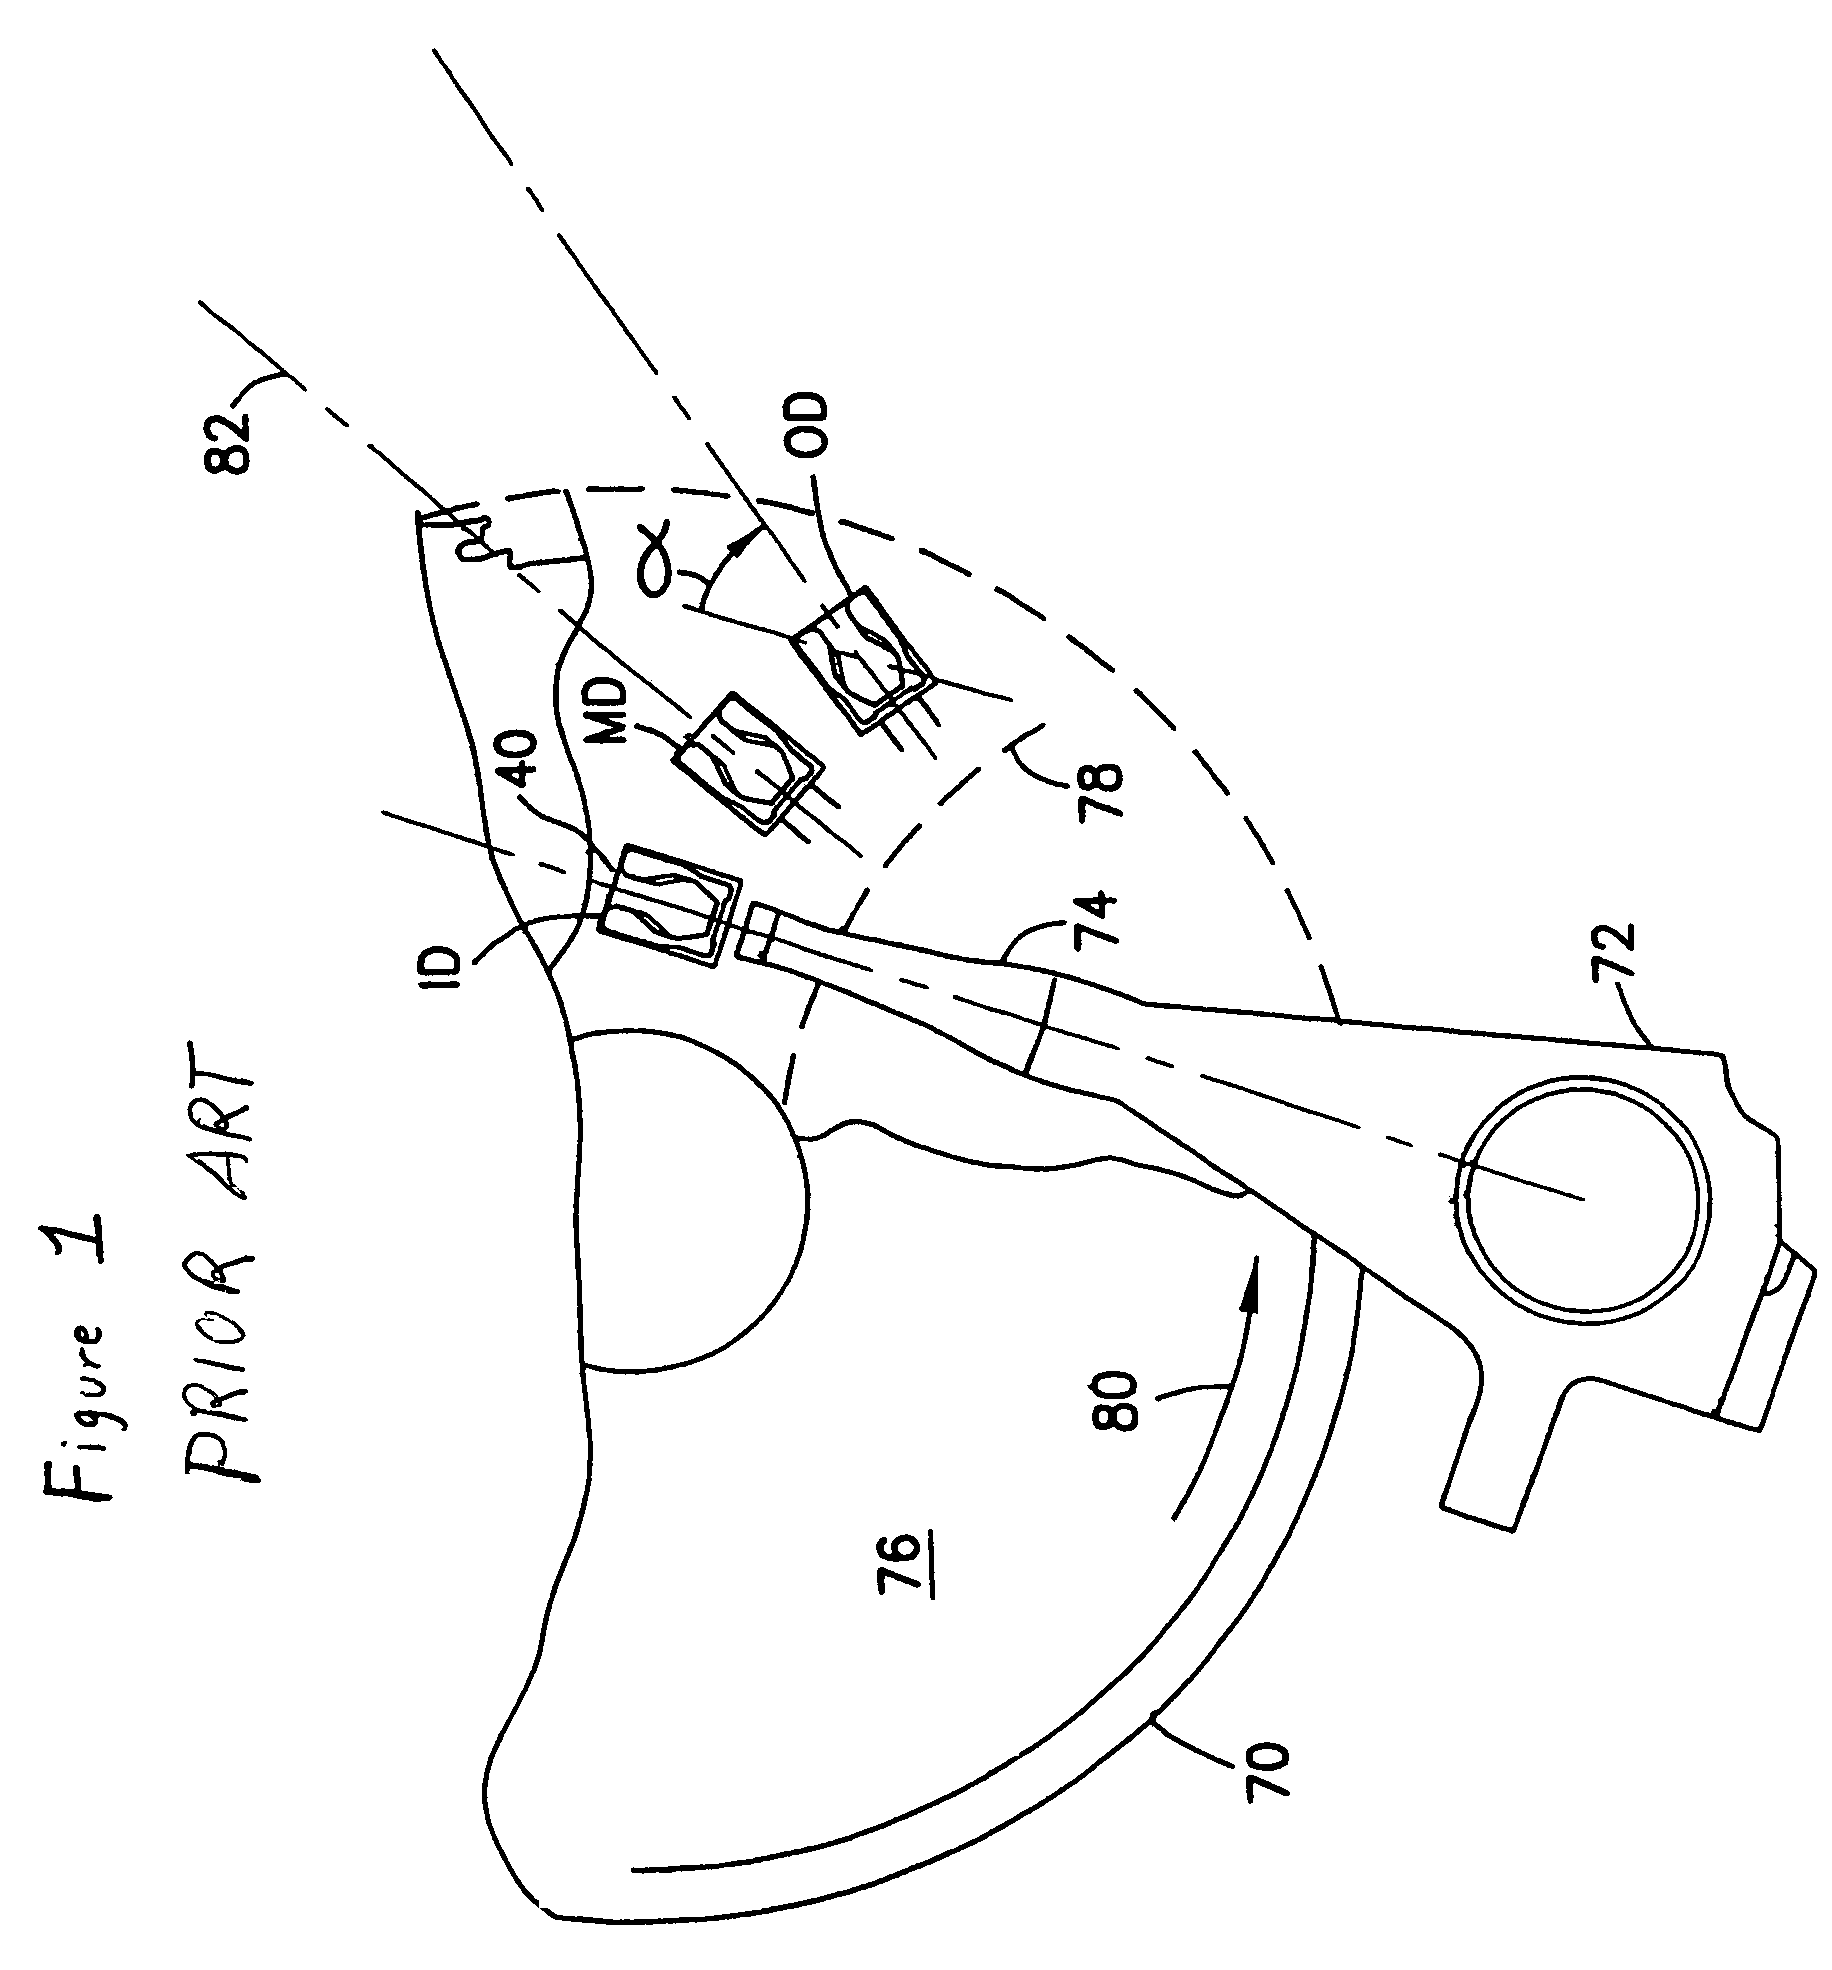 Method and apparatus for providing an additional ground pad and electrical connection for grounding a magnetic recording head